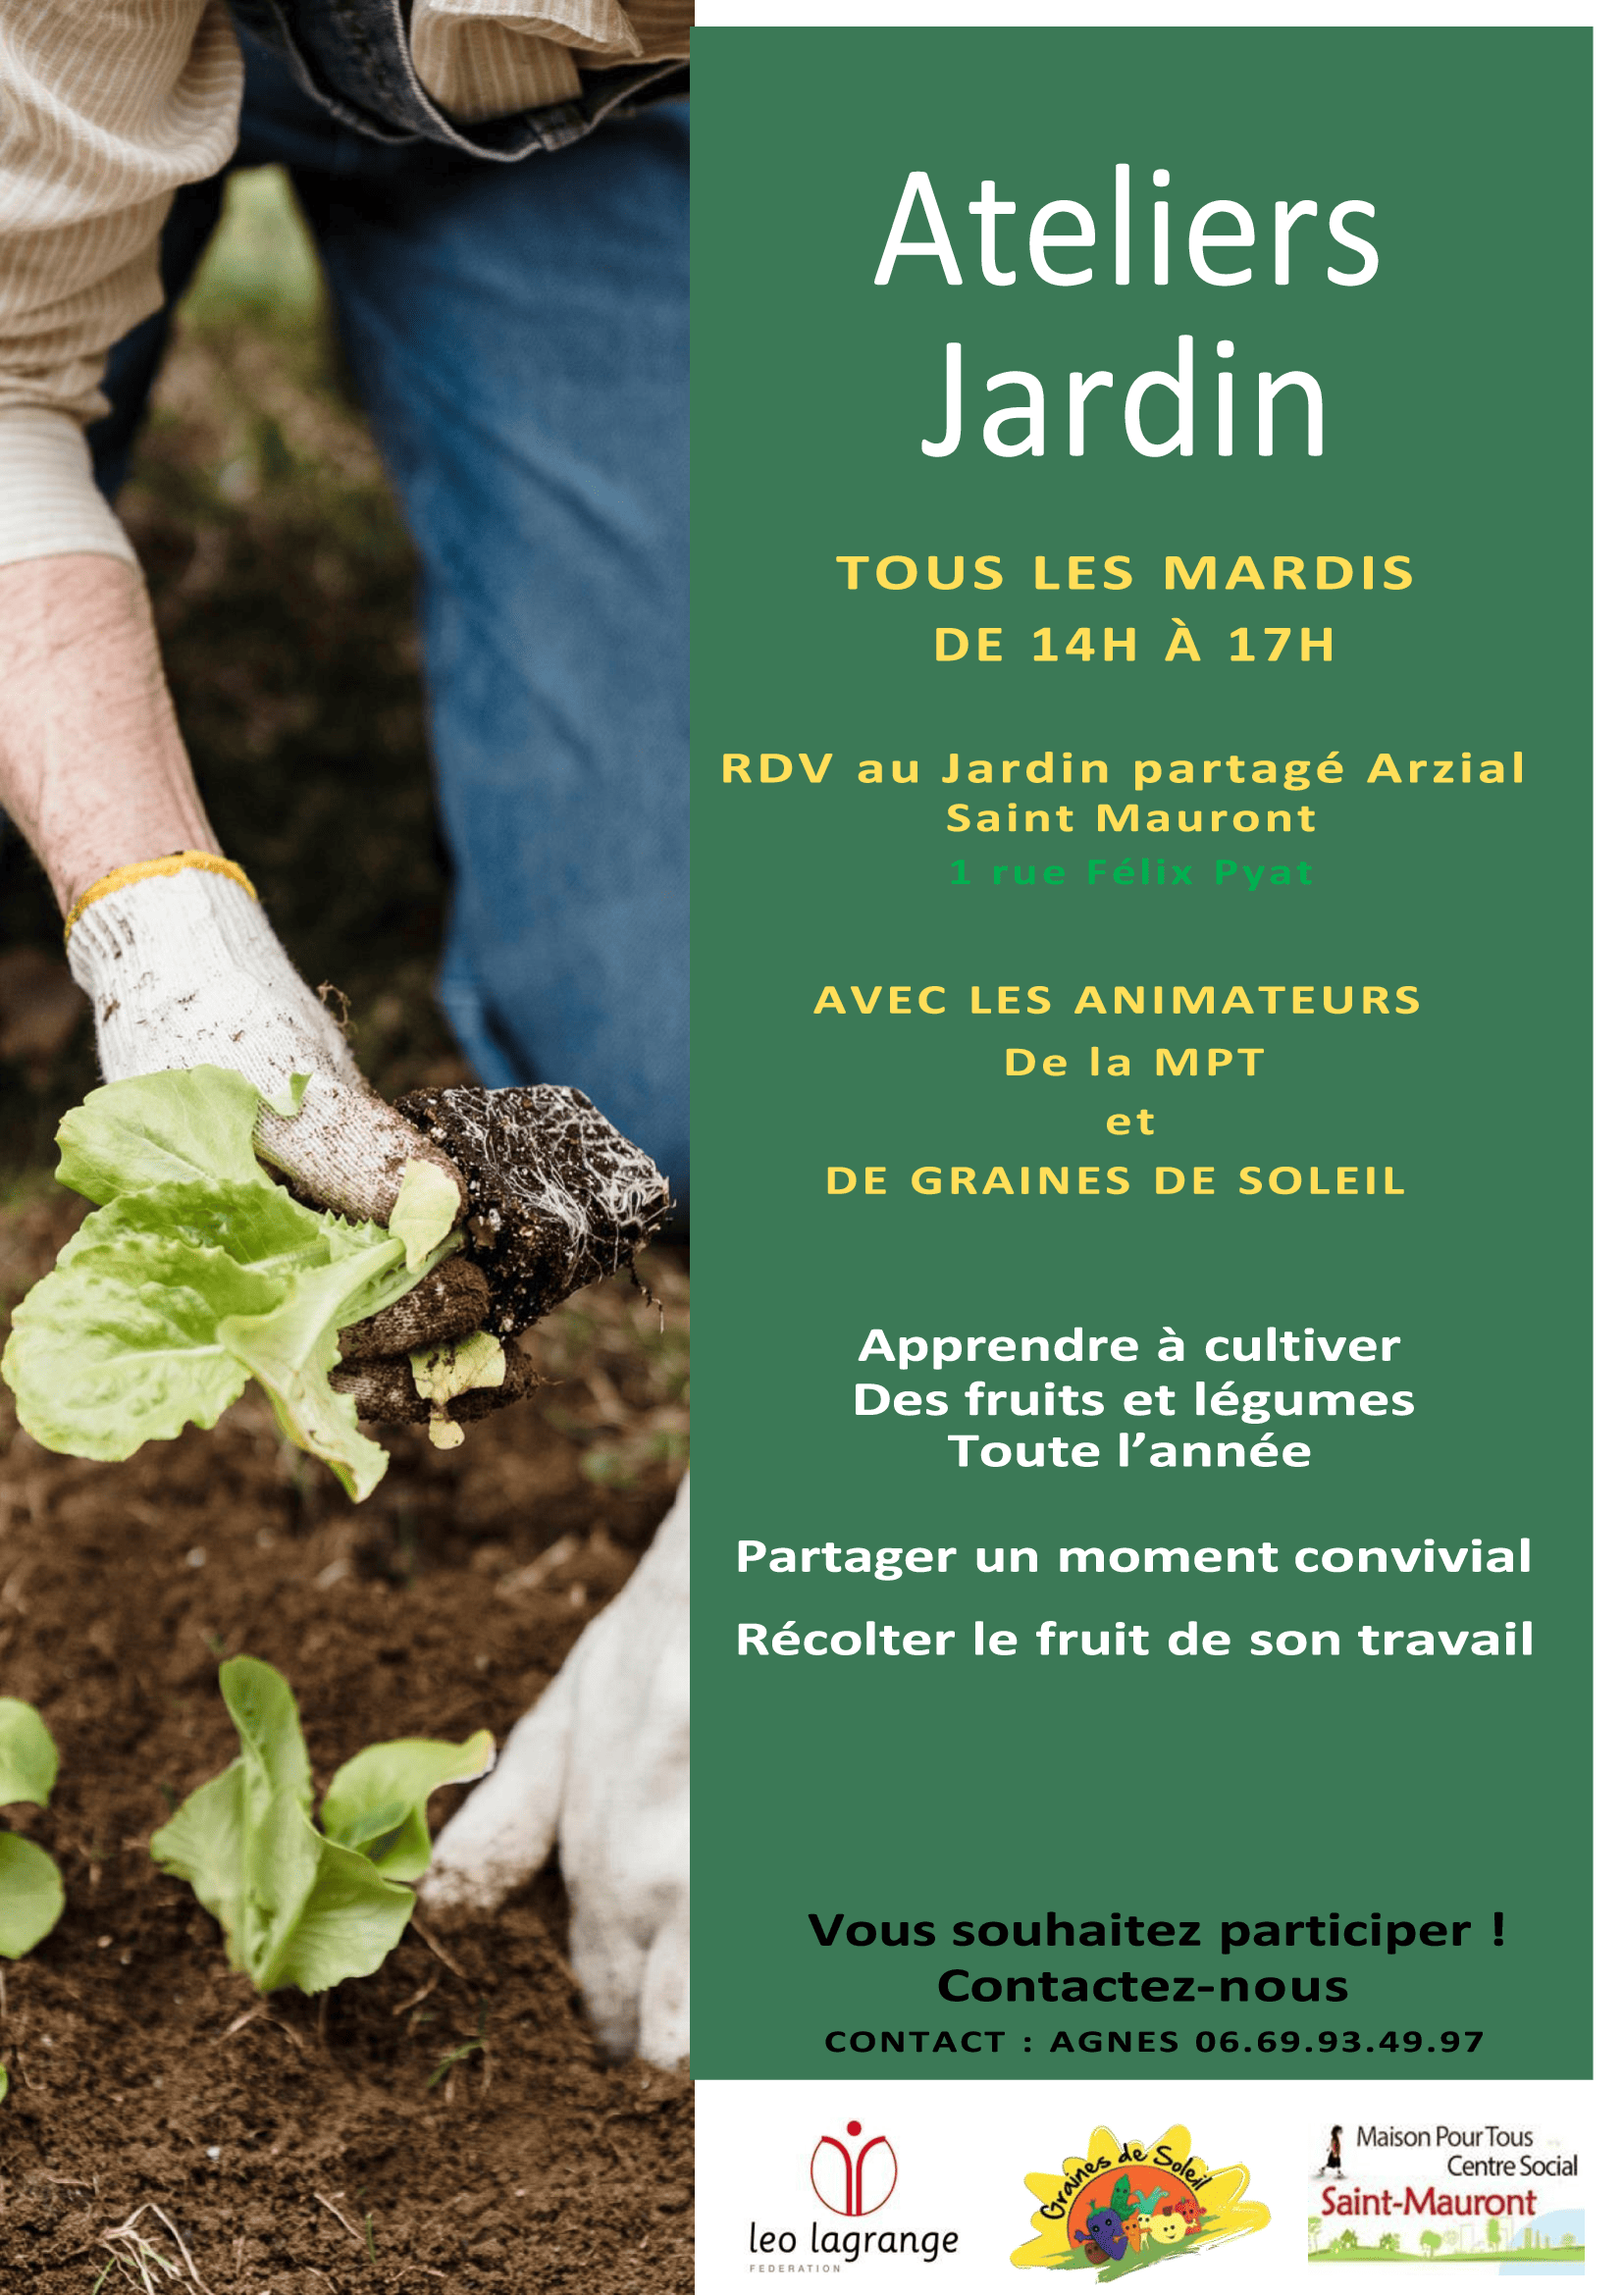 You are currently viewing Ateliers Jardins